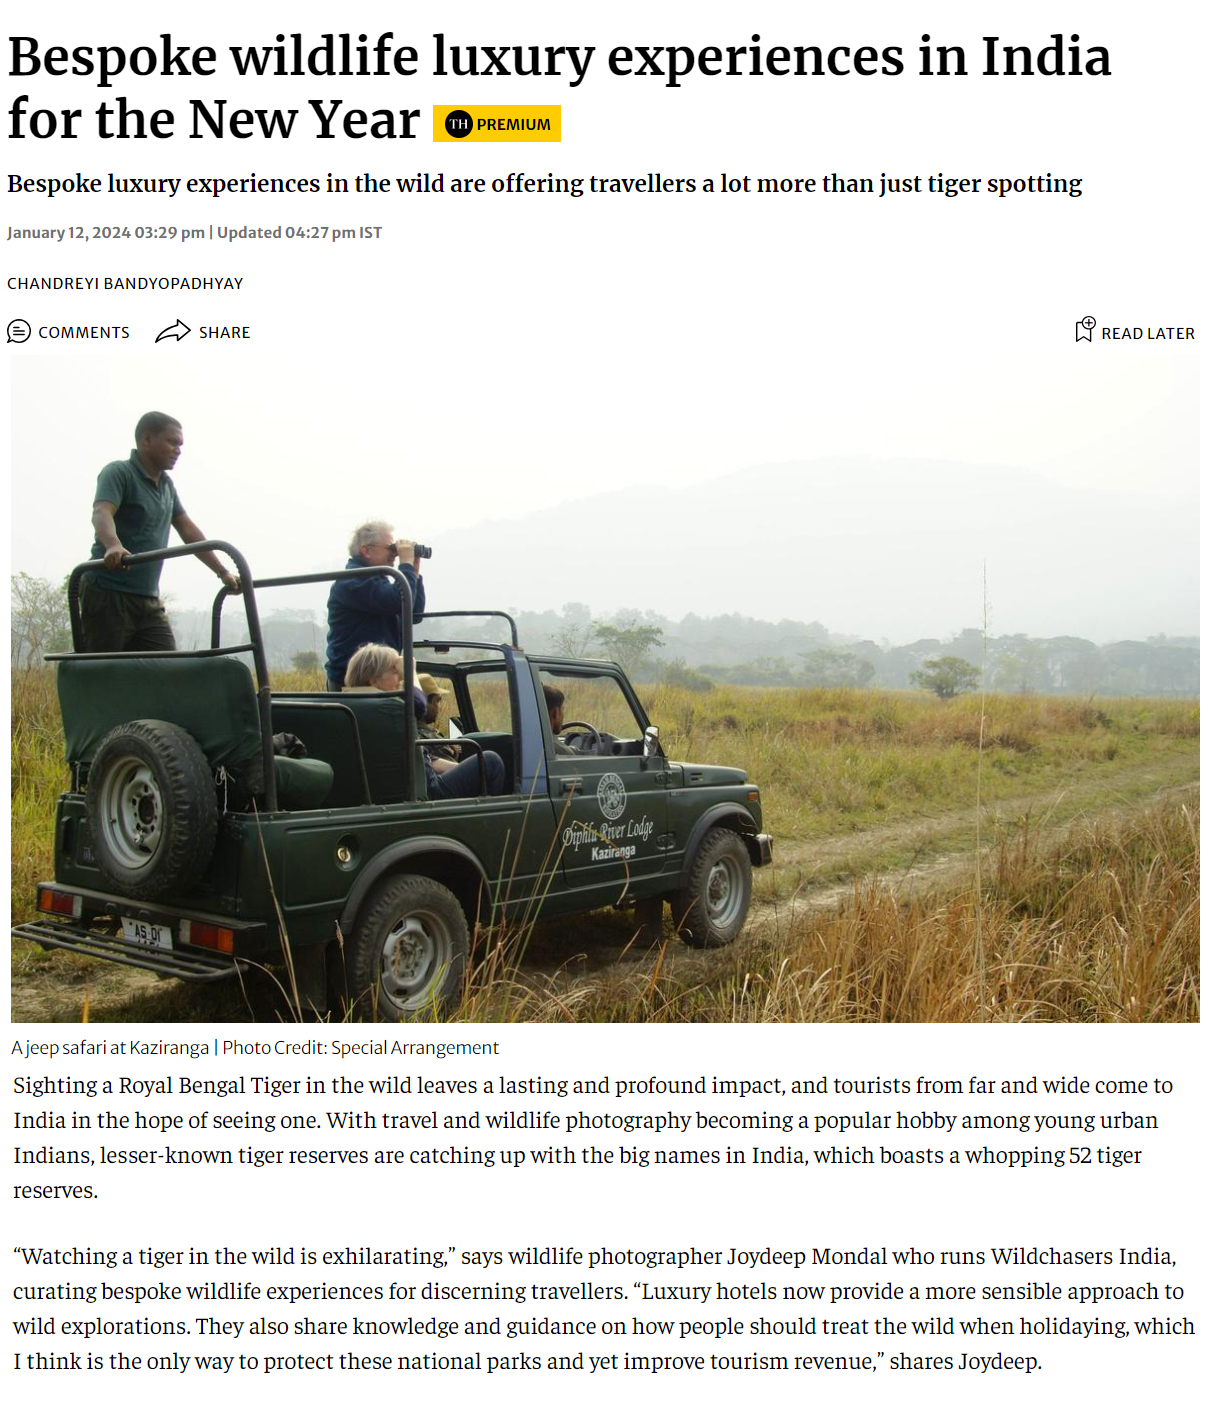 Bespoke wildlife luxury experiences in India for the New Year